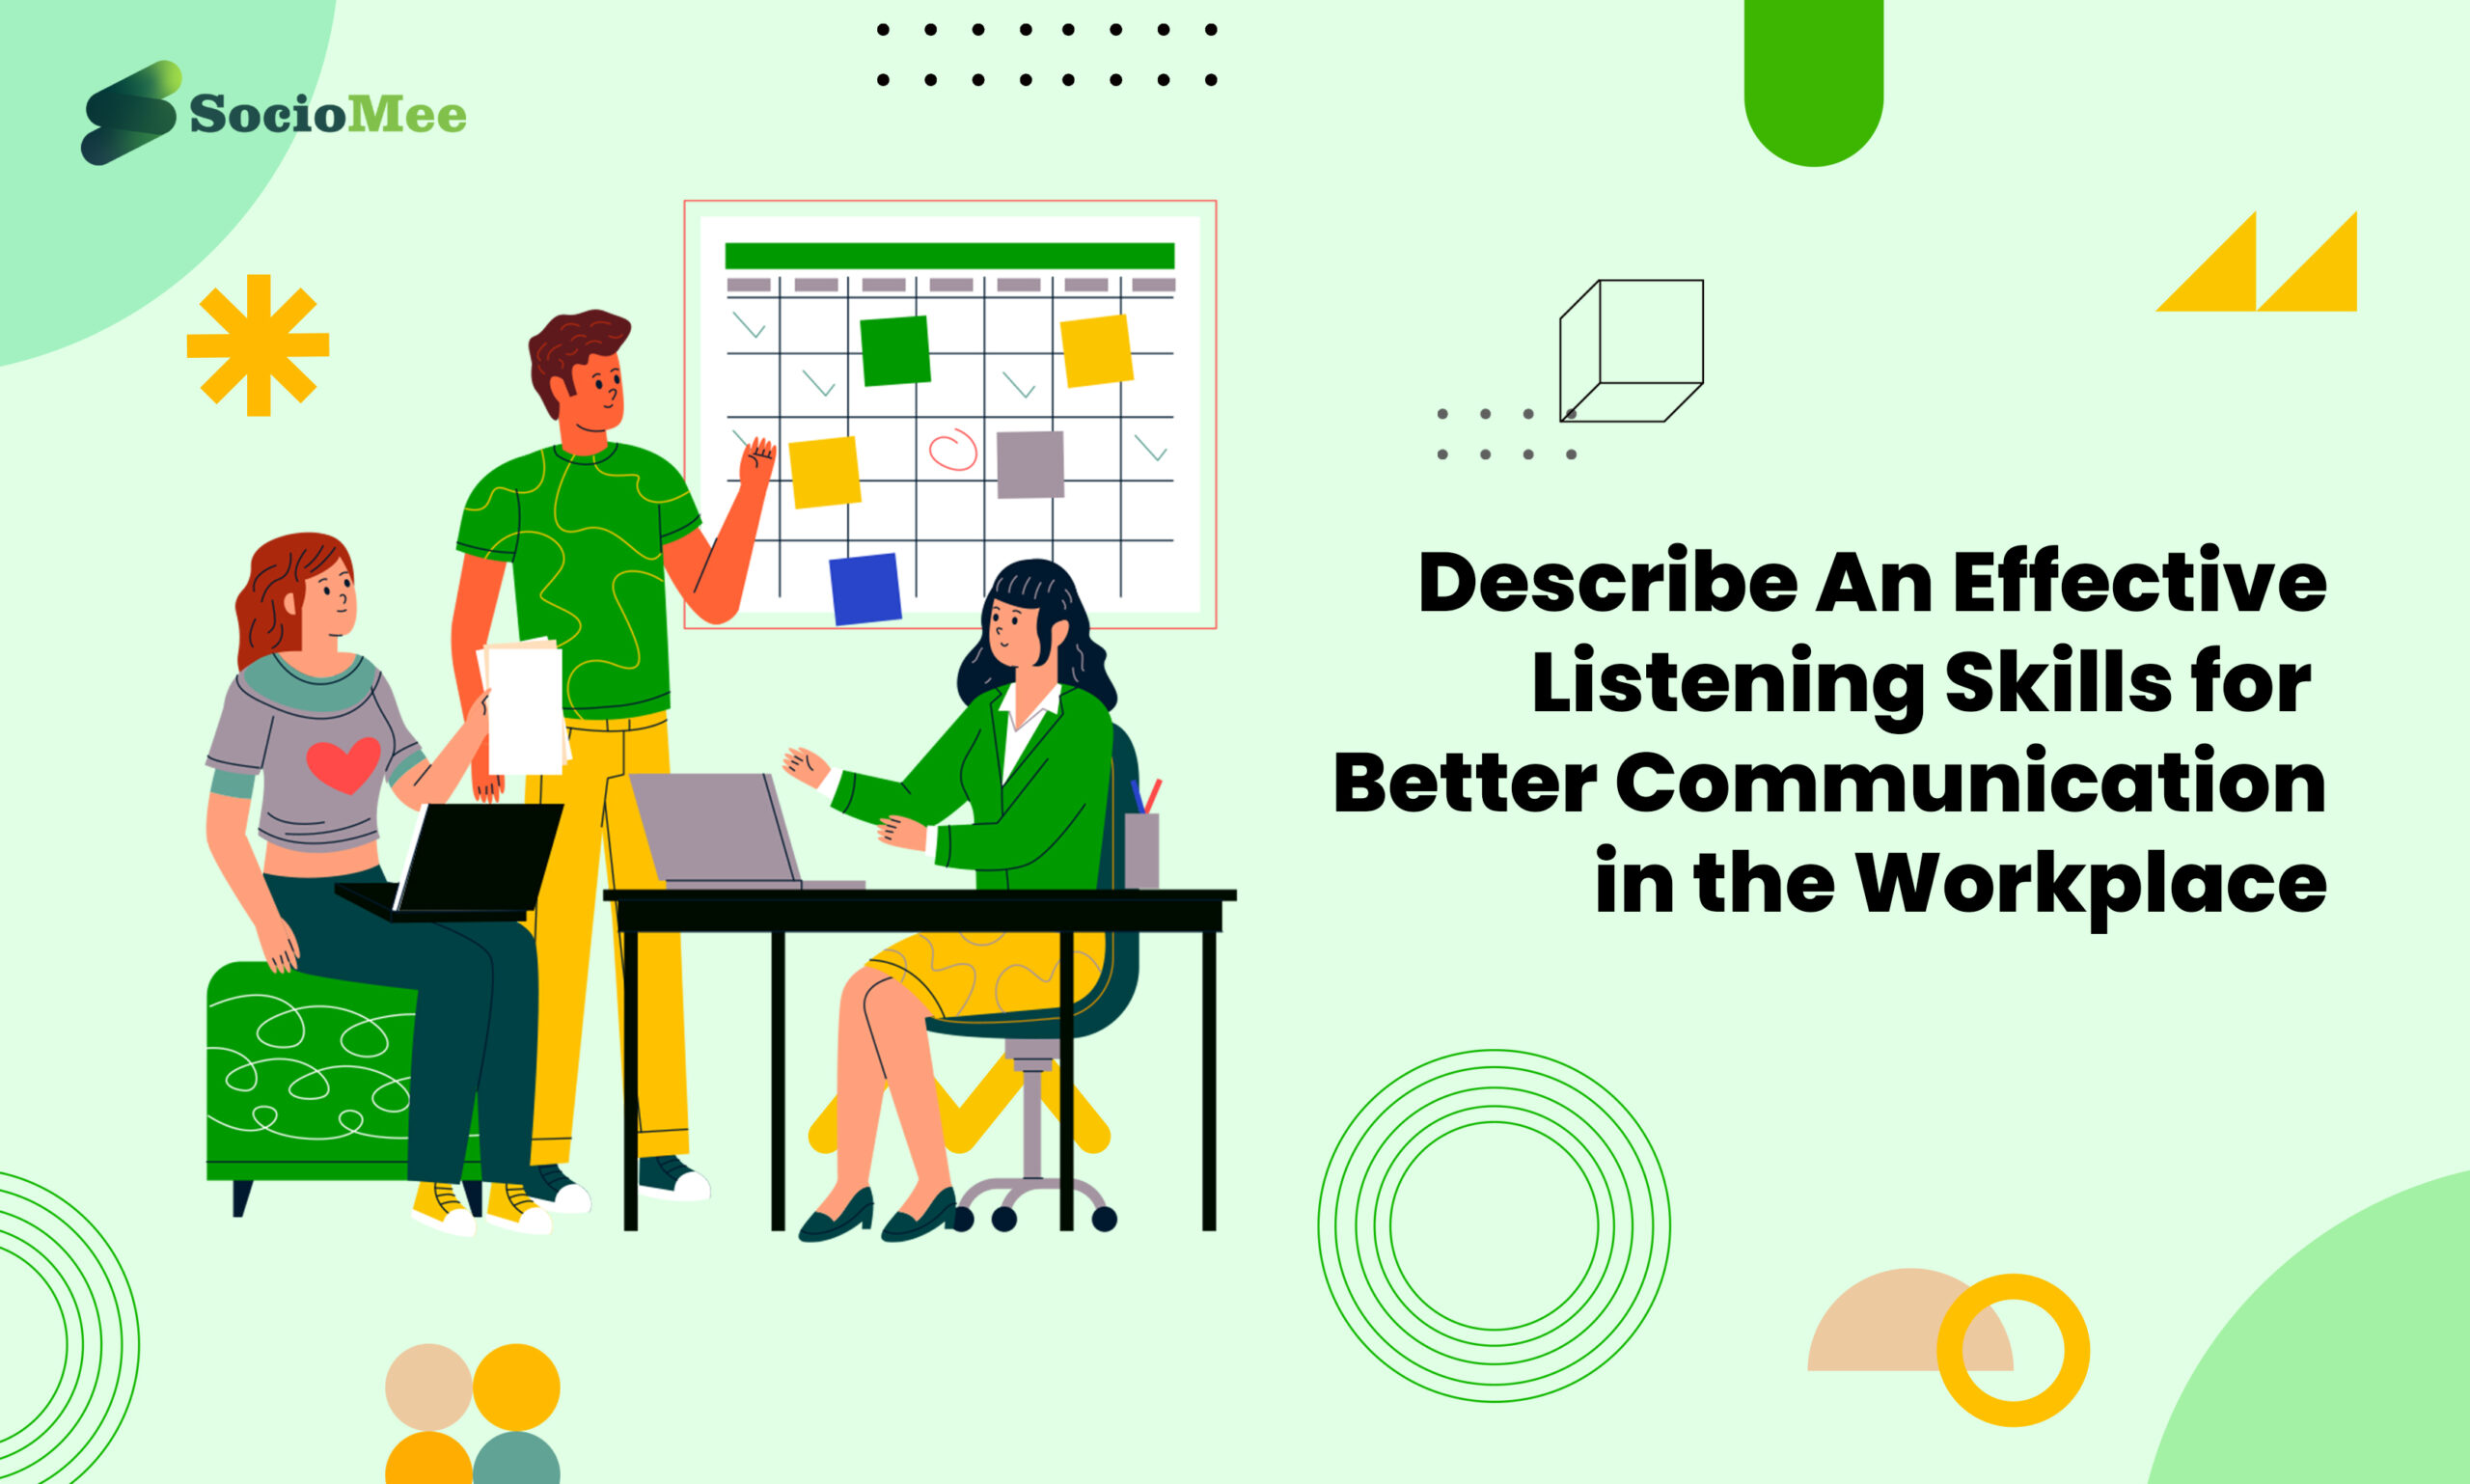 How To Describe An Effective Listening Skills for Better Communication in the Workplace